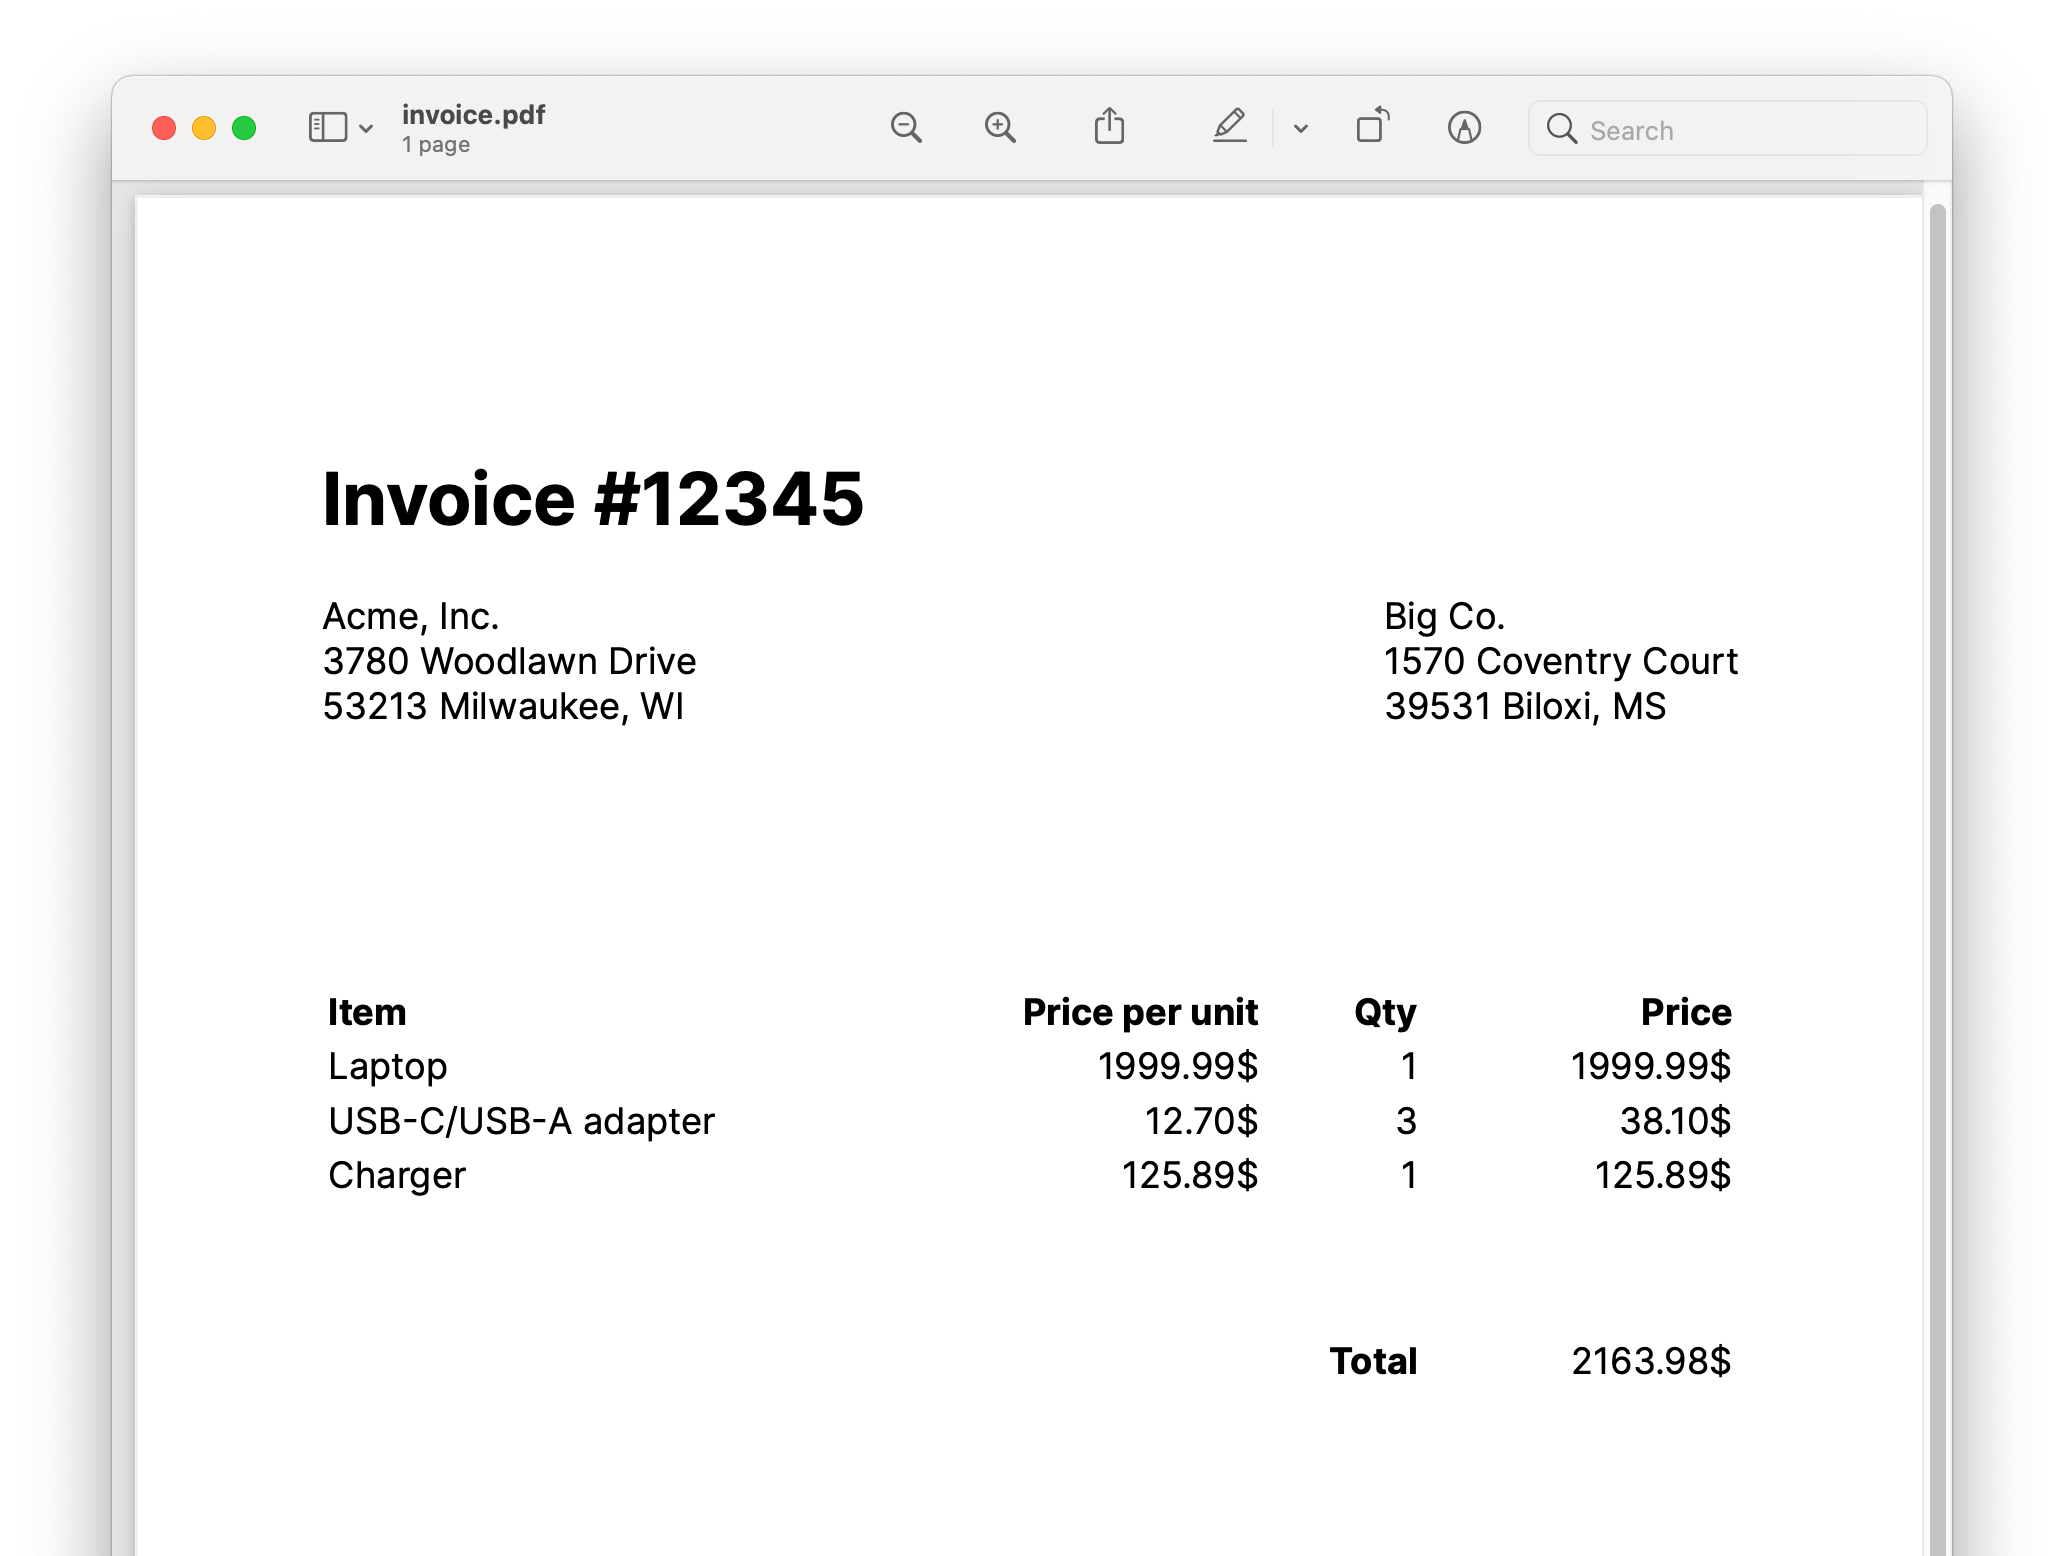 PDF Invoice generated from HTML with items